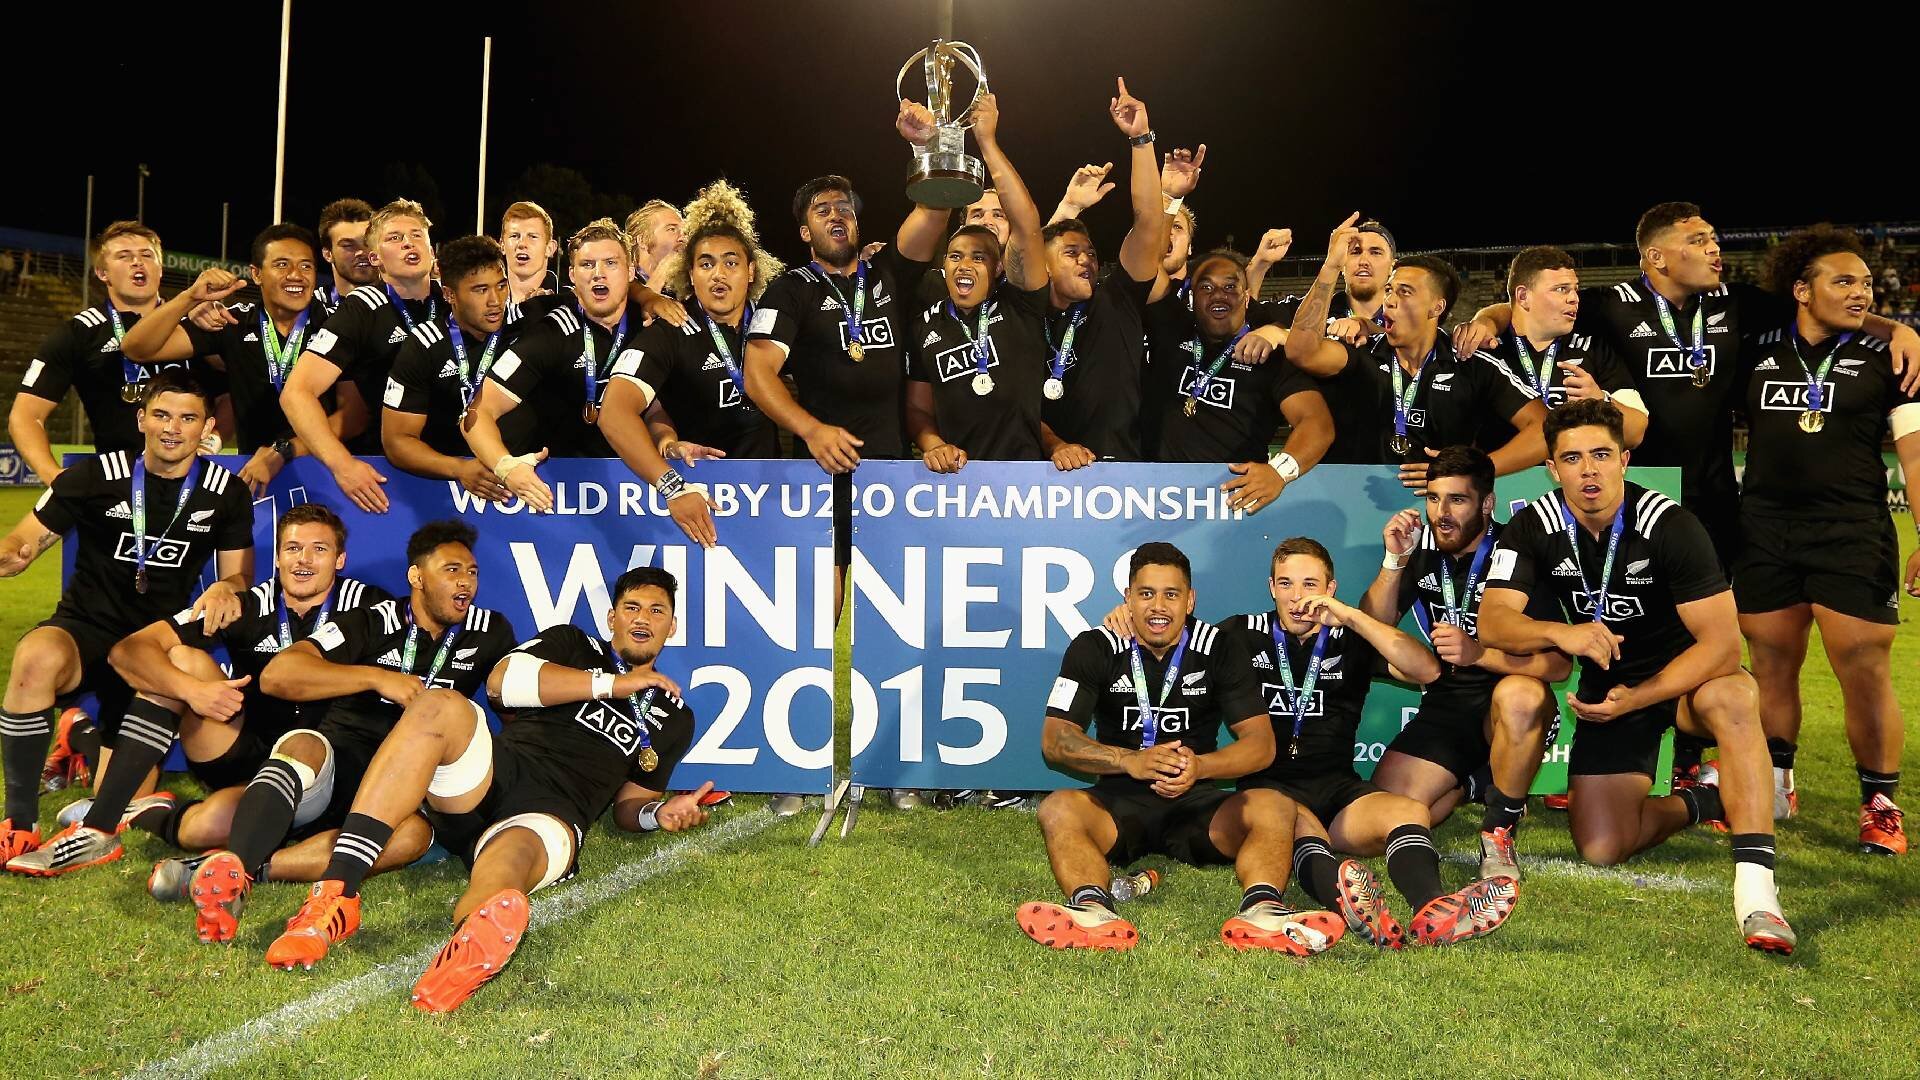 Where are they now: The 2015 New Zealand U20 world champions